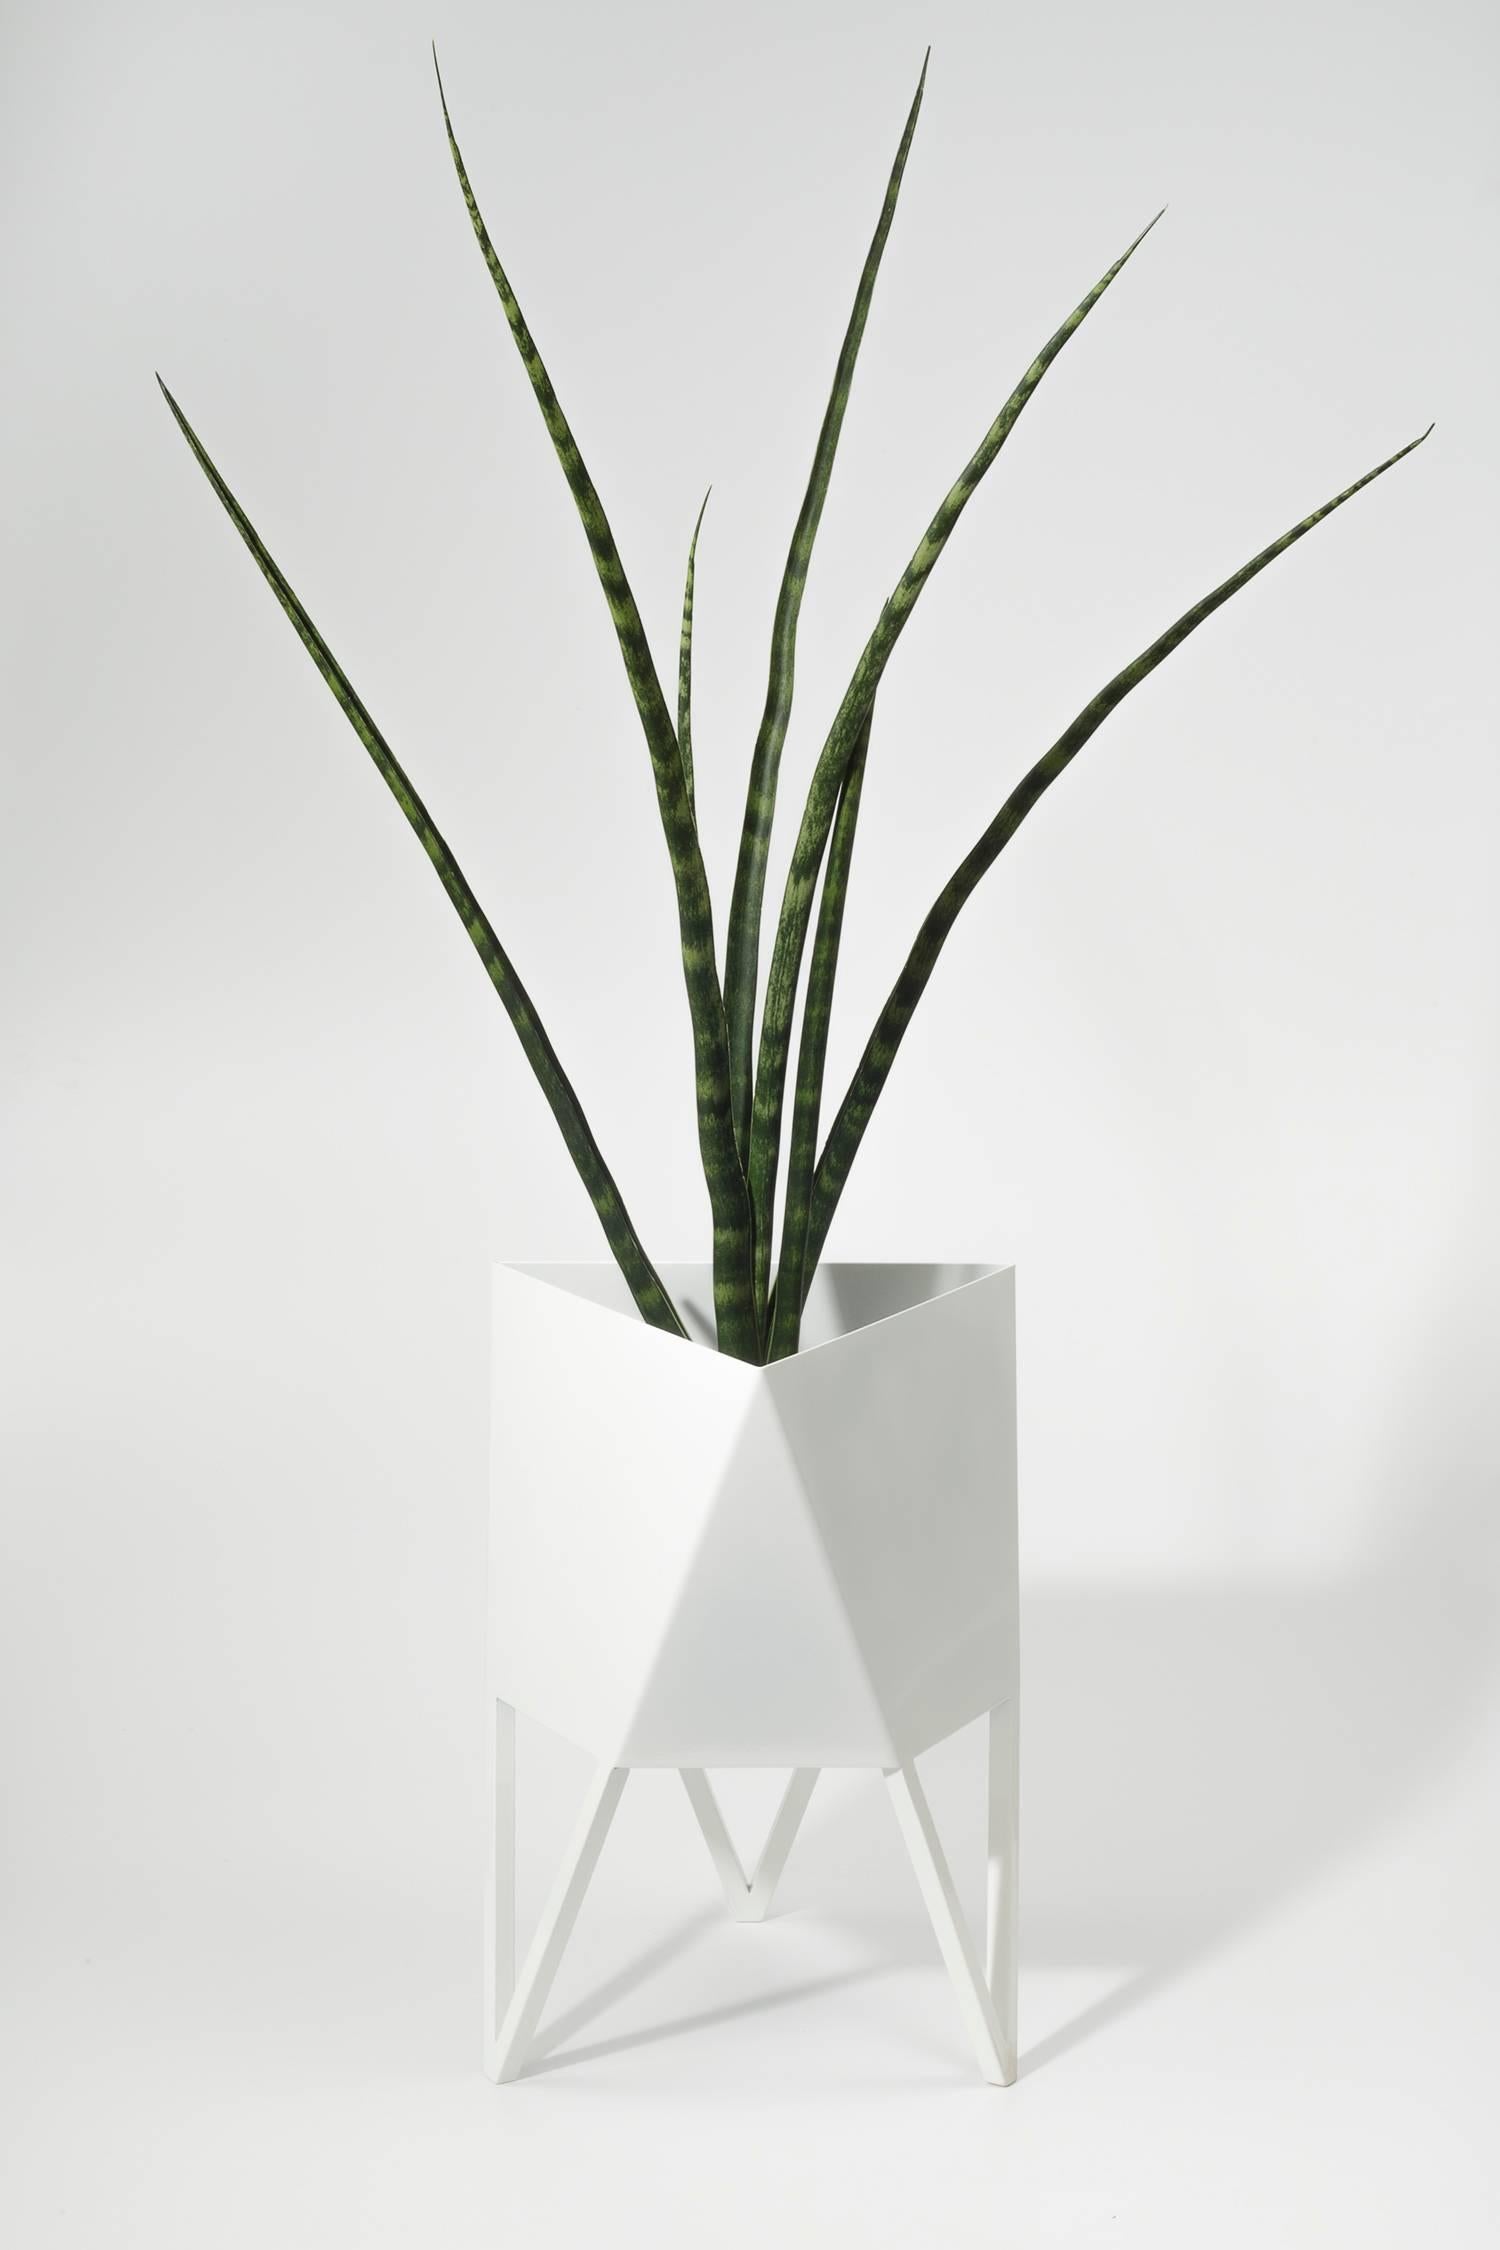 Faceted Large Deca Planter, Solar Rain Grey Powder Coated Steel, Force/Collide, 2017